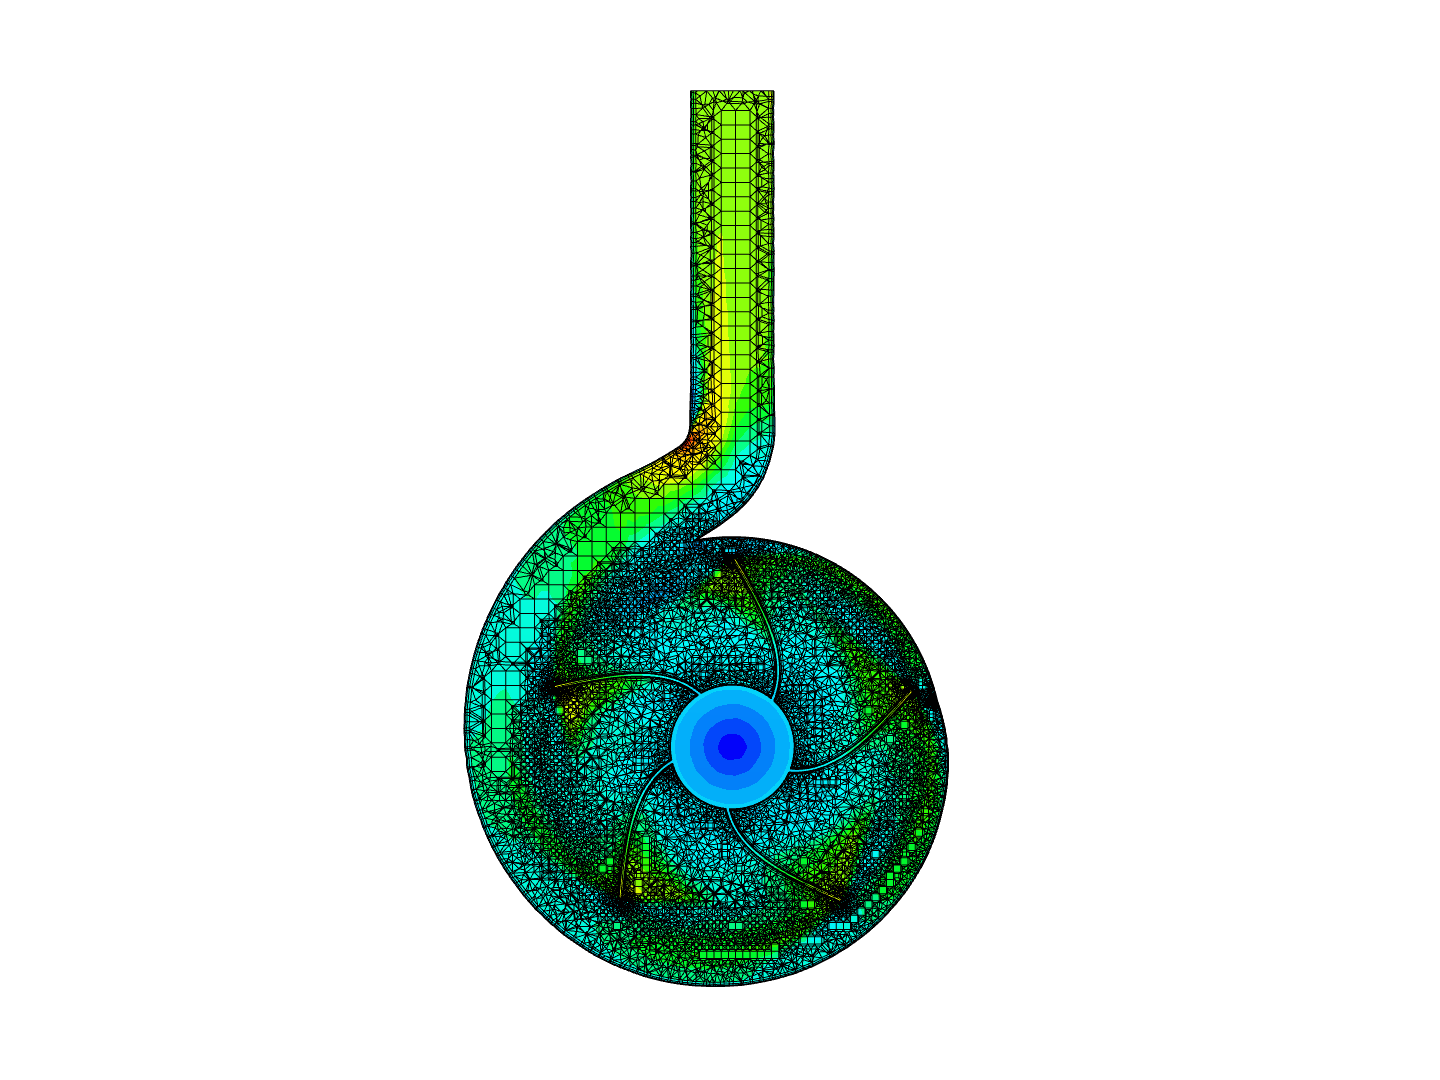 Pump for learning about CFD - Copy image